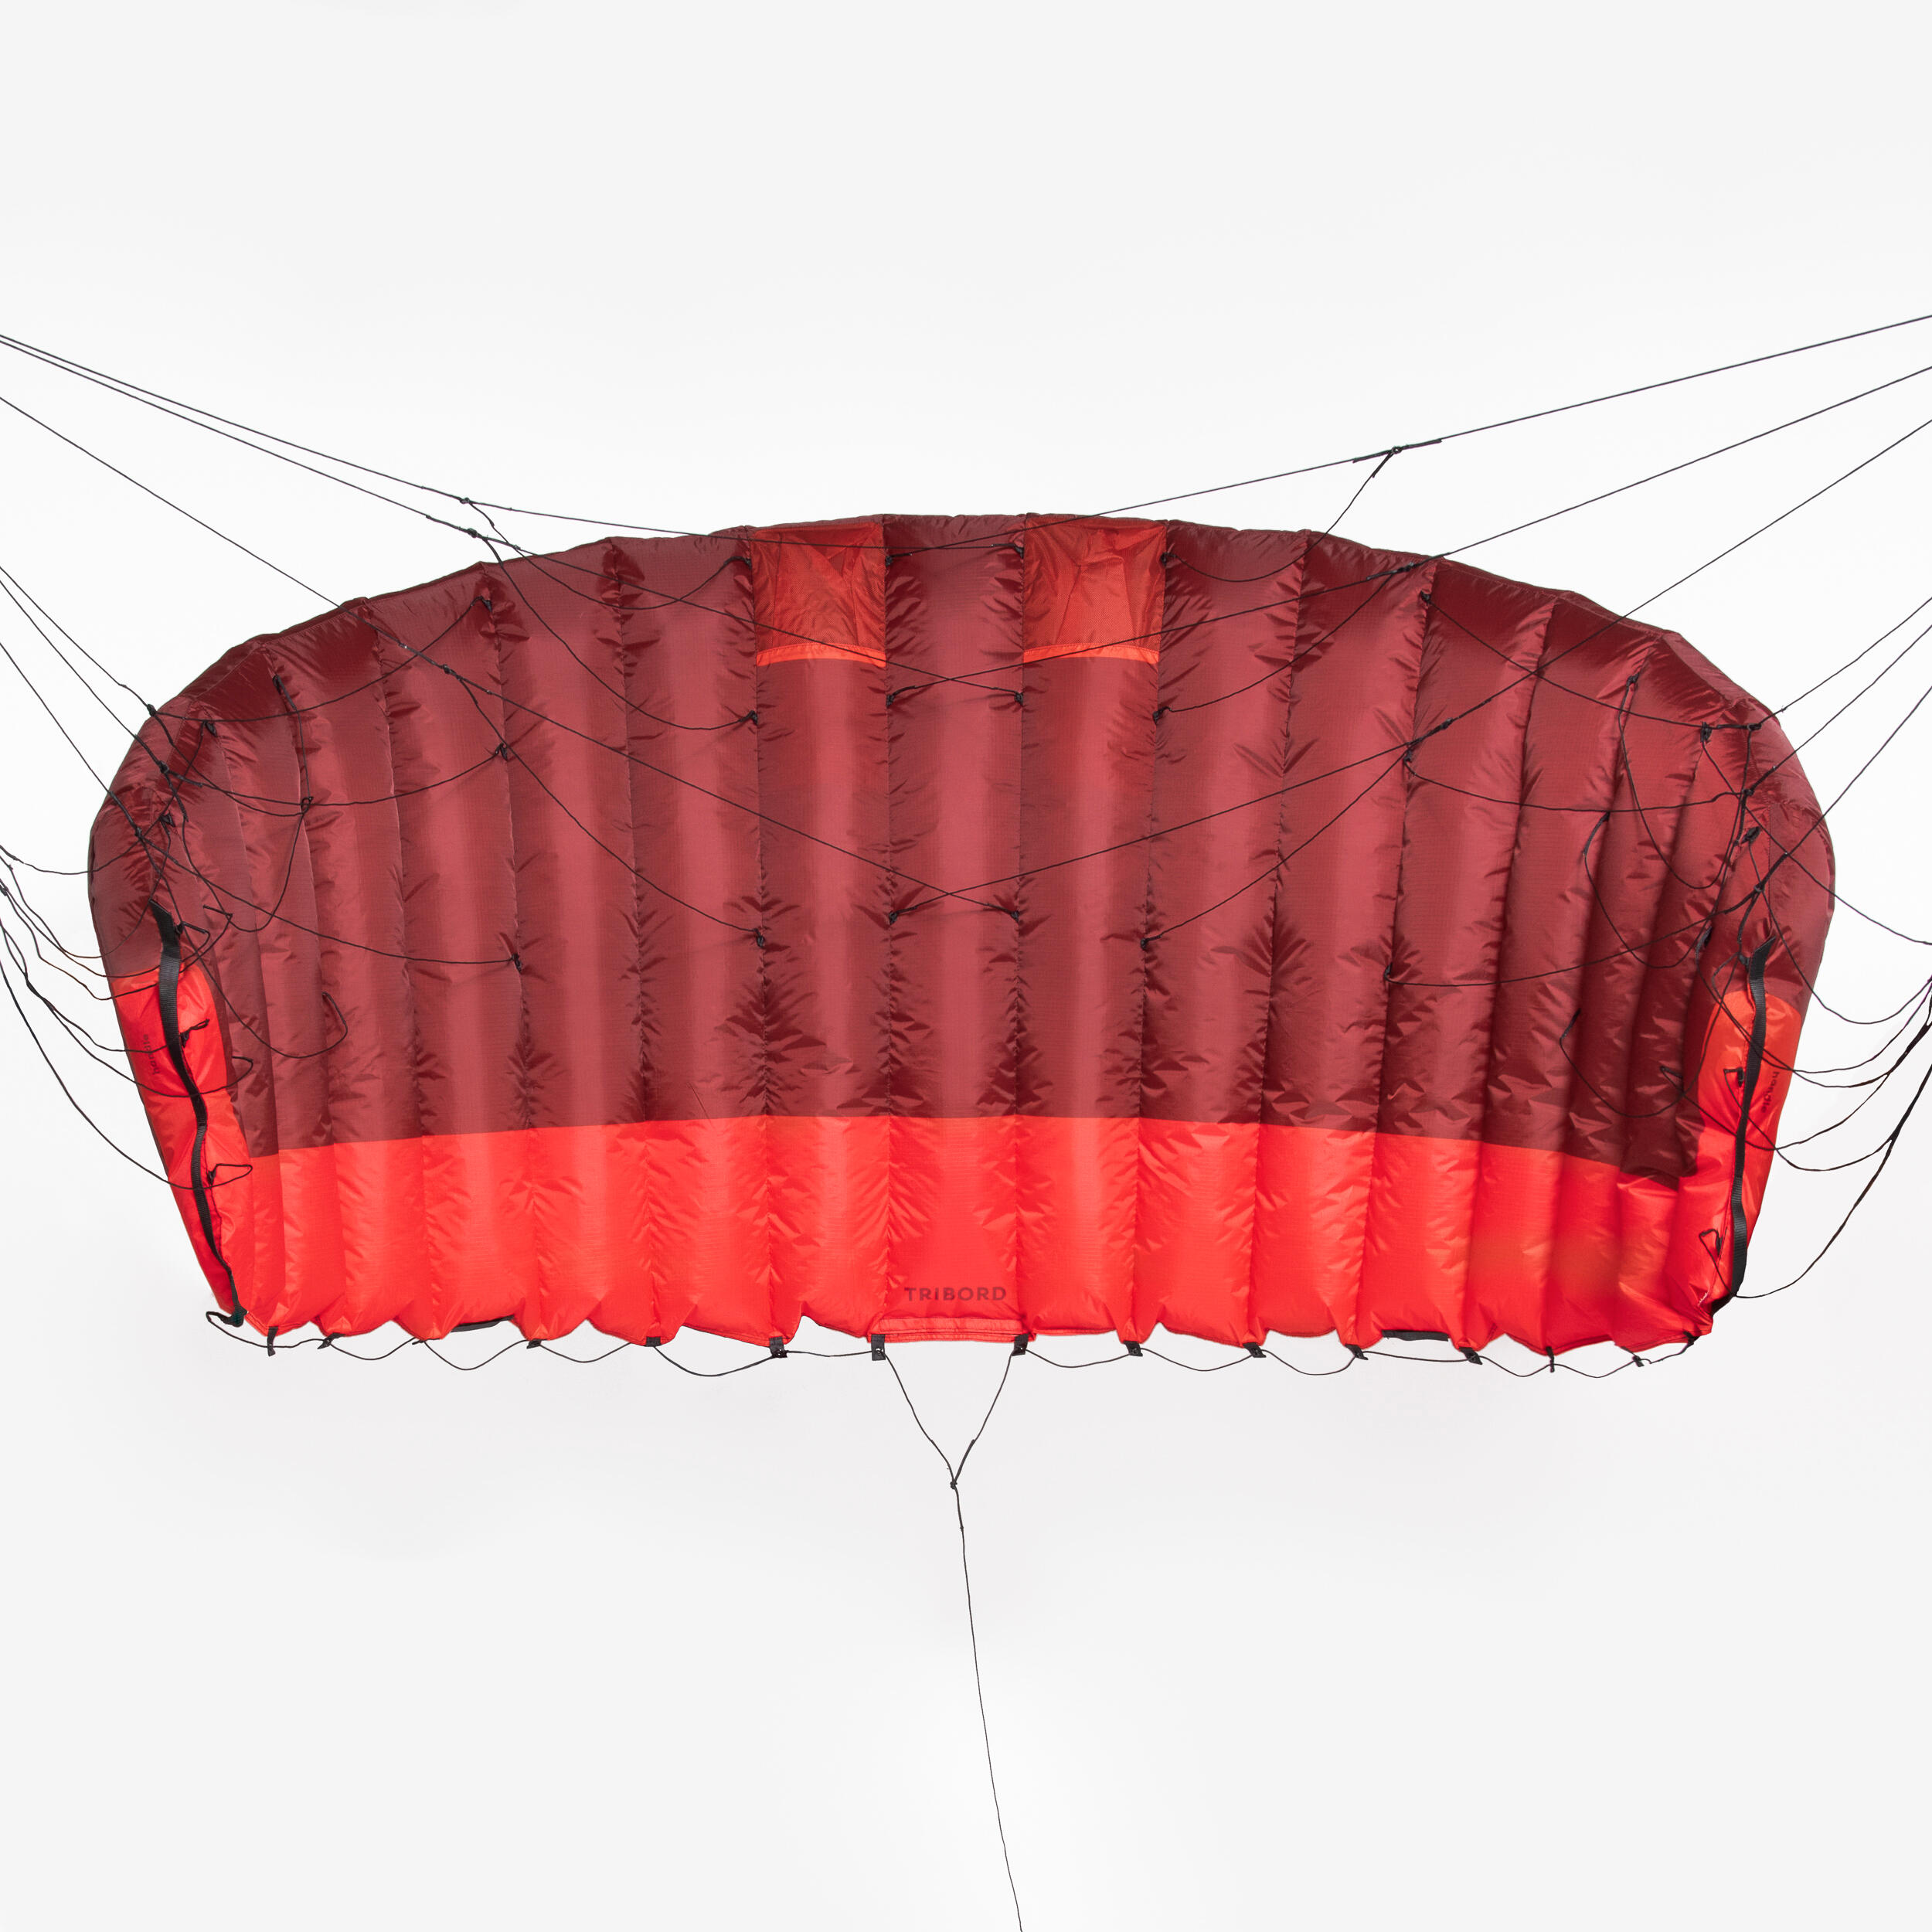 TRACTION KITE KS100 2.5 m2 red - with bar 4/7